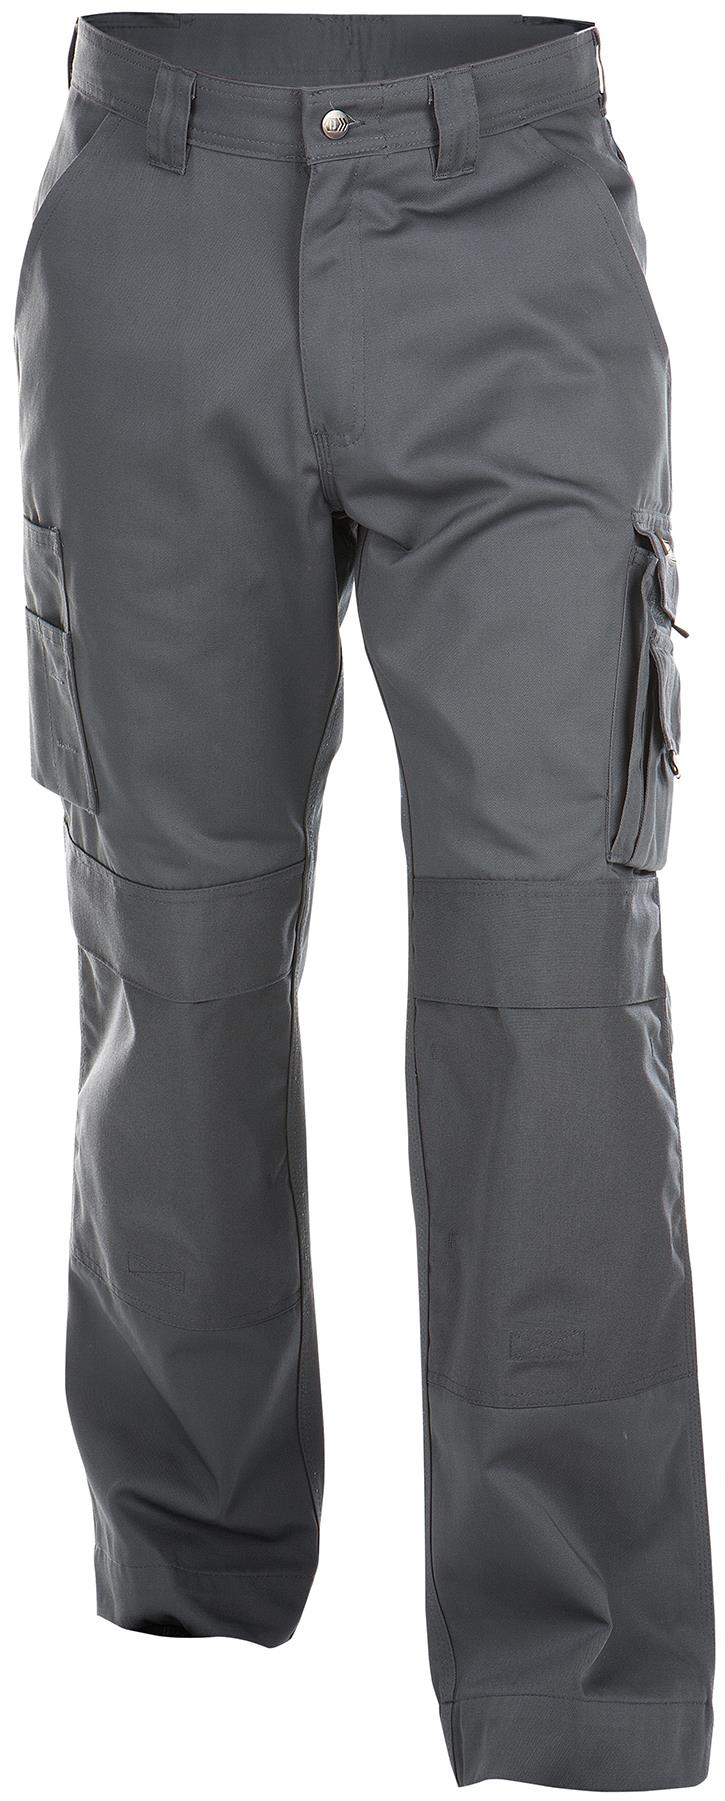 Snickers Lightweight Loose Fit Summer Work Trousers with Kneepad and  Holster Pockets3211 Kneepad Trousers ActiveWorkwear